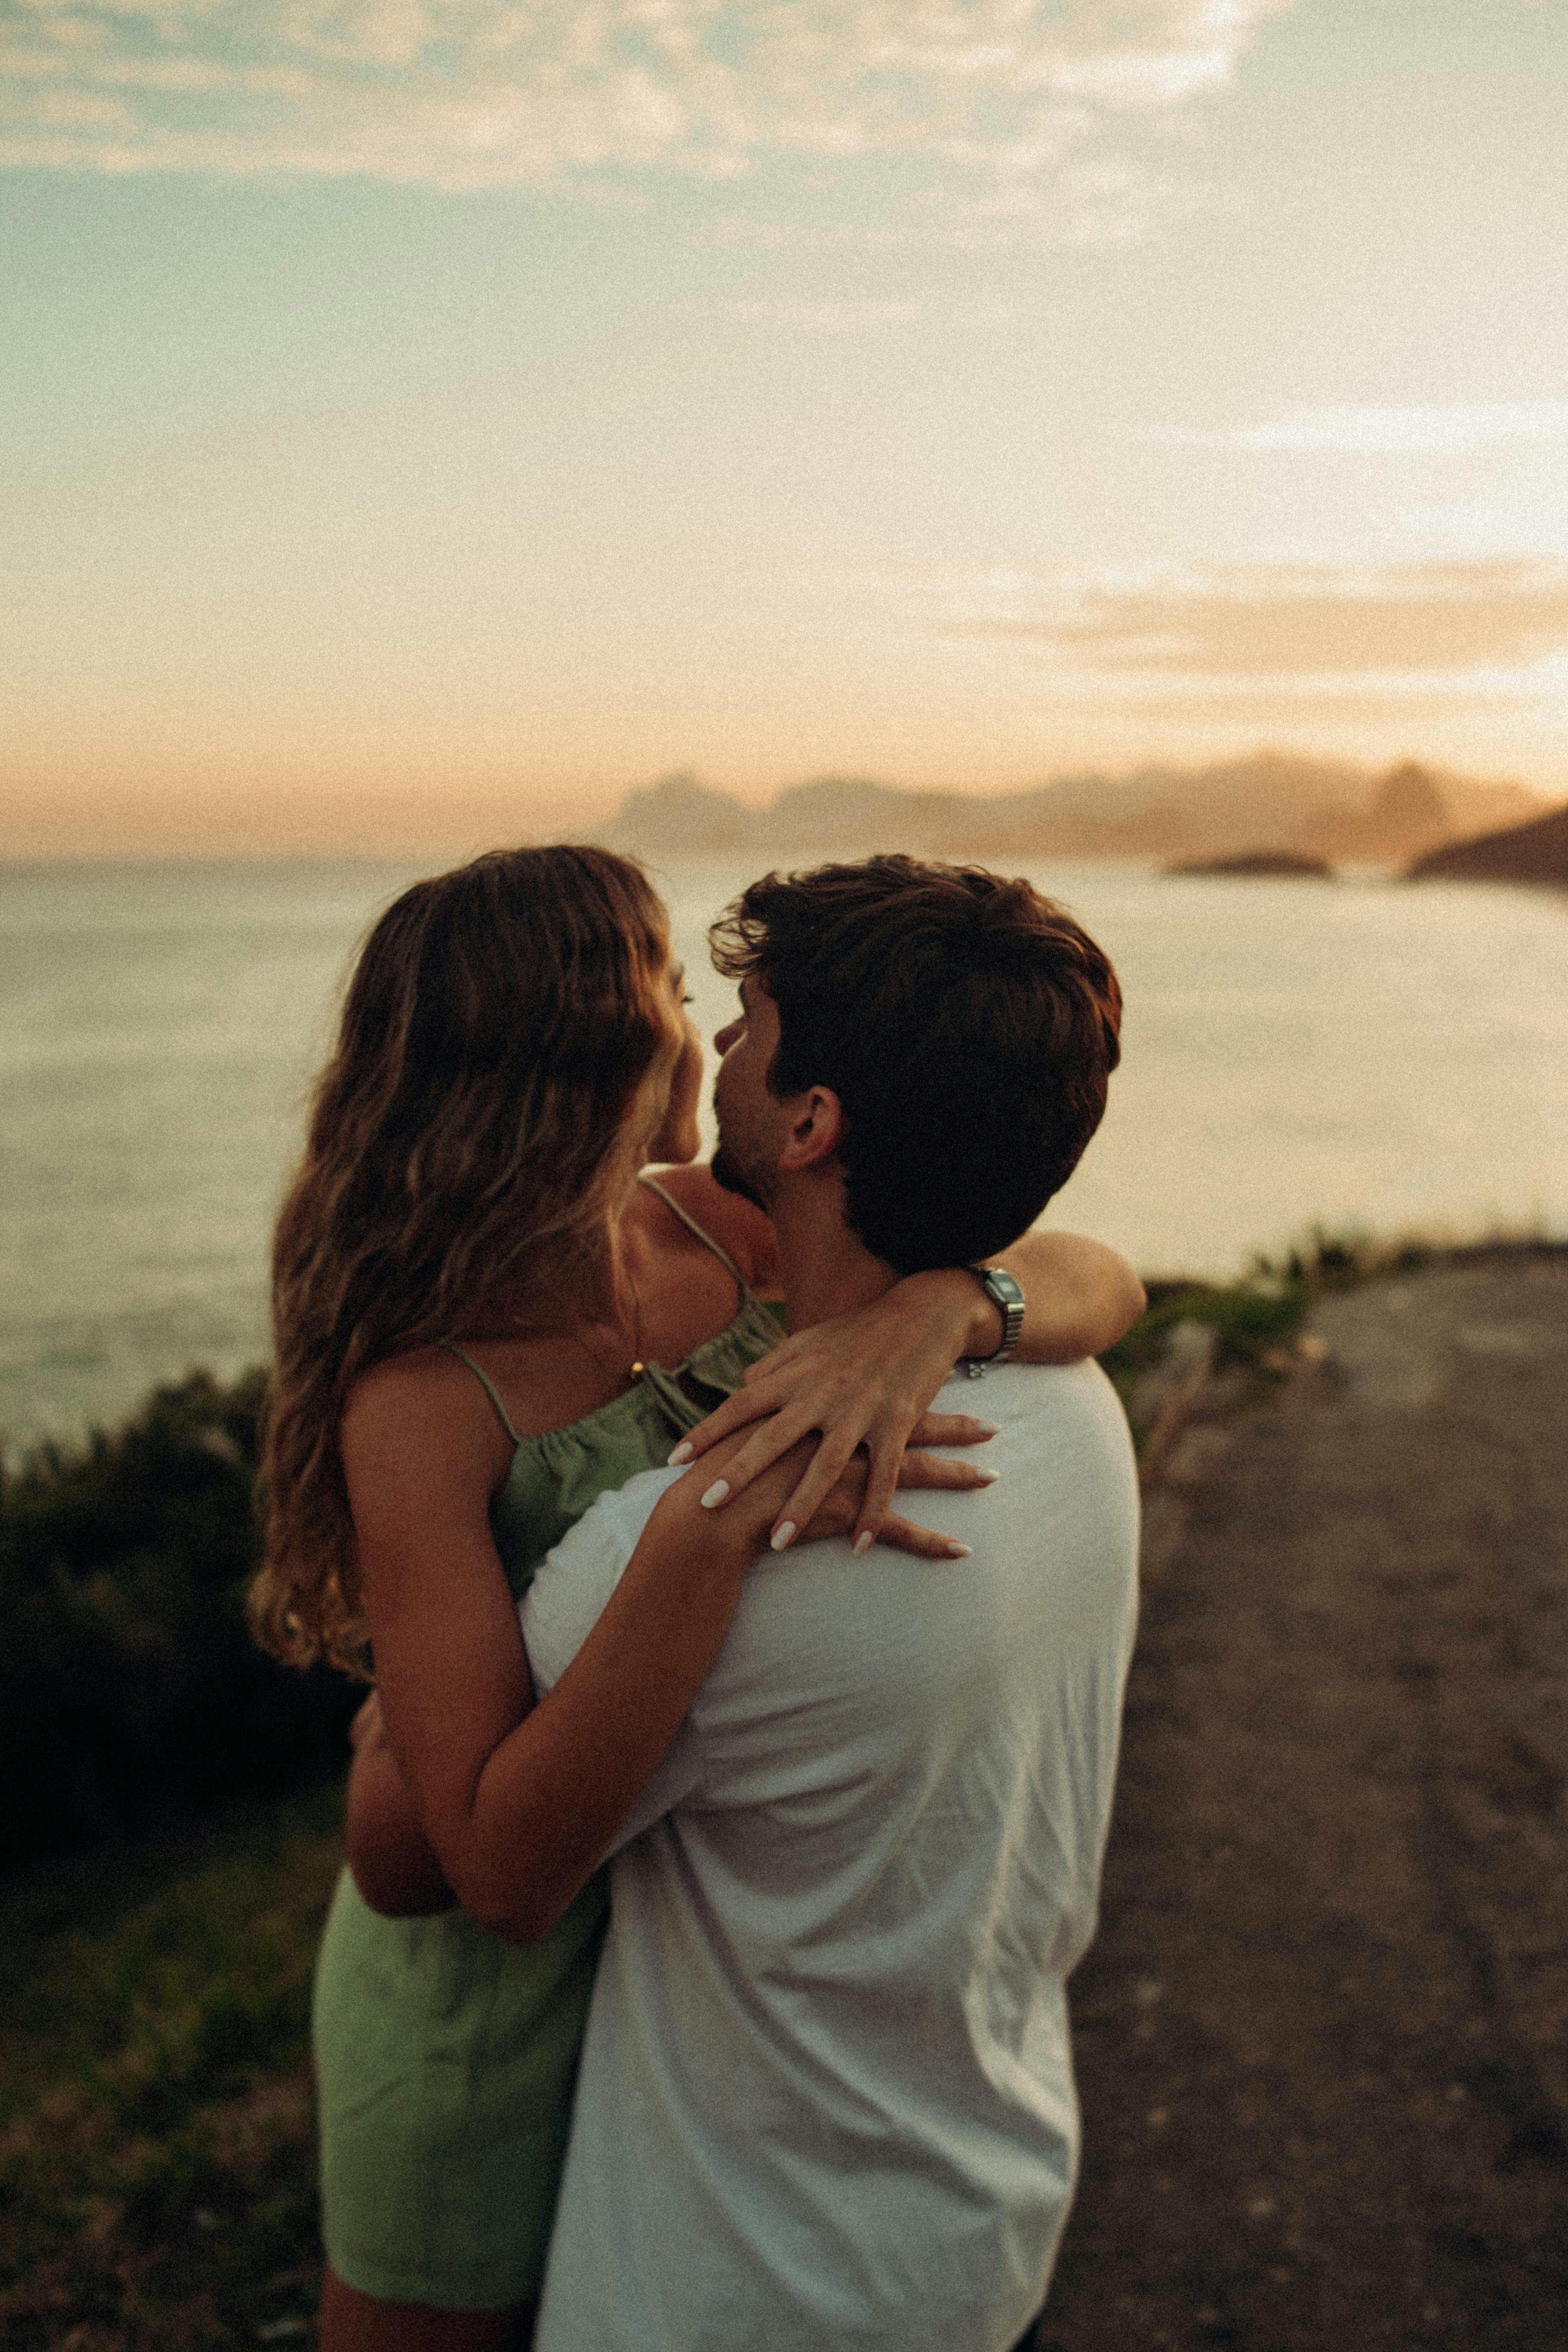 A couple embracing on the beach at sunset | Source: Pexels